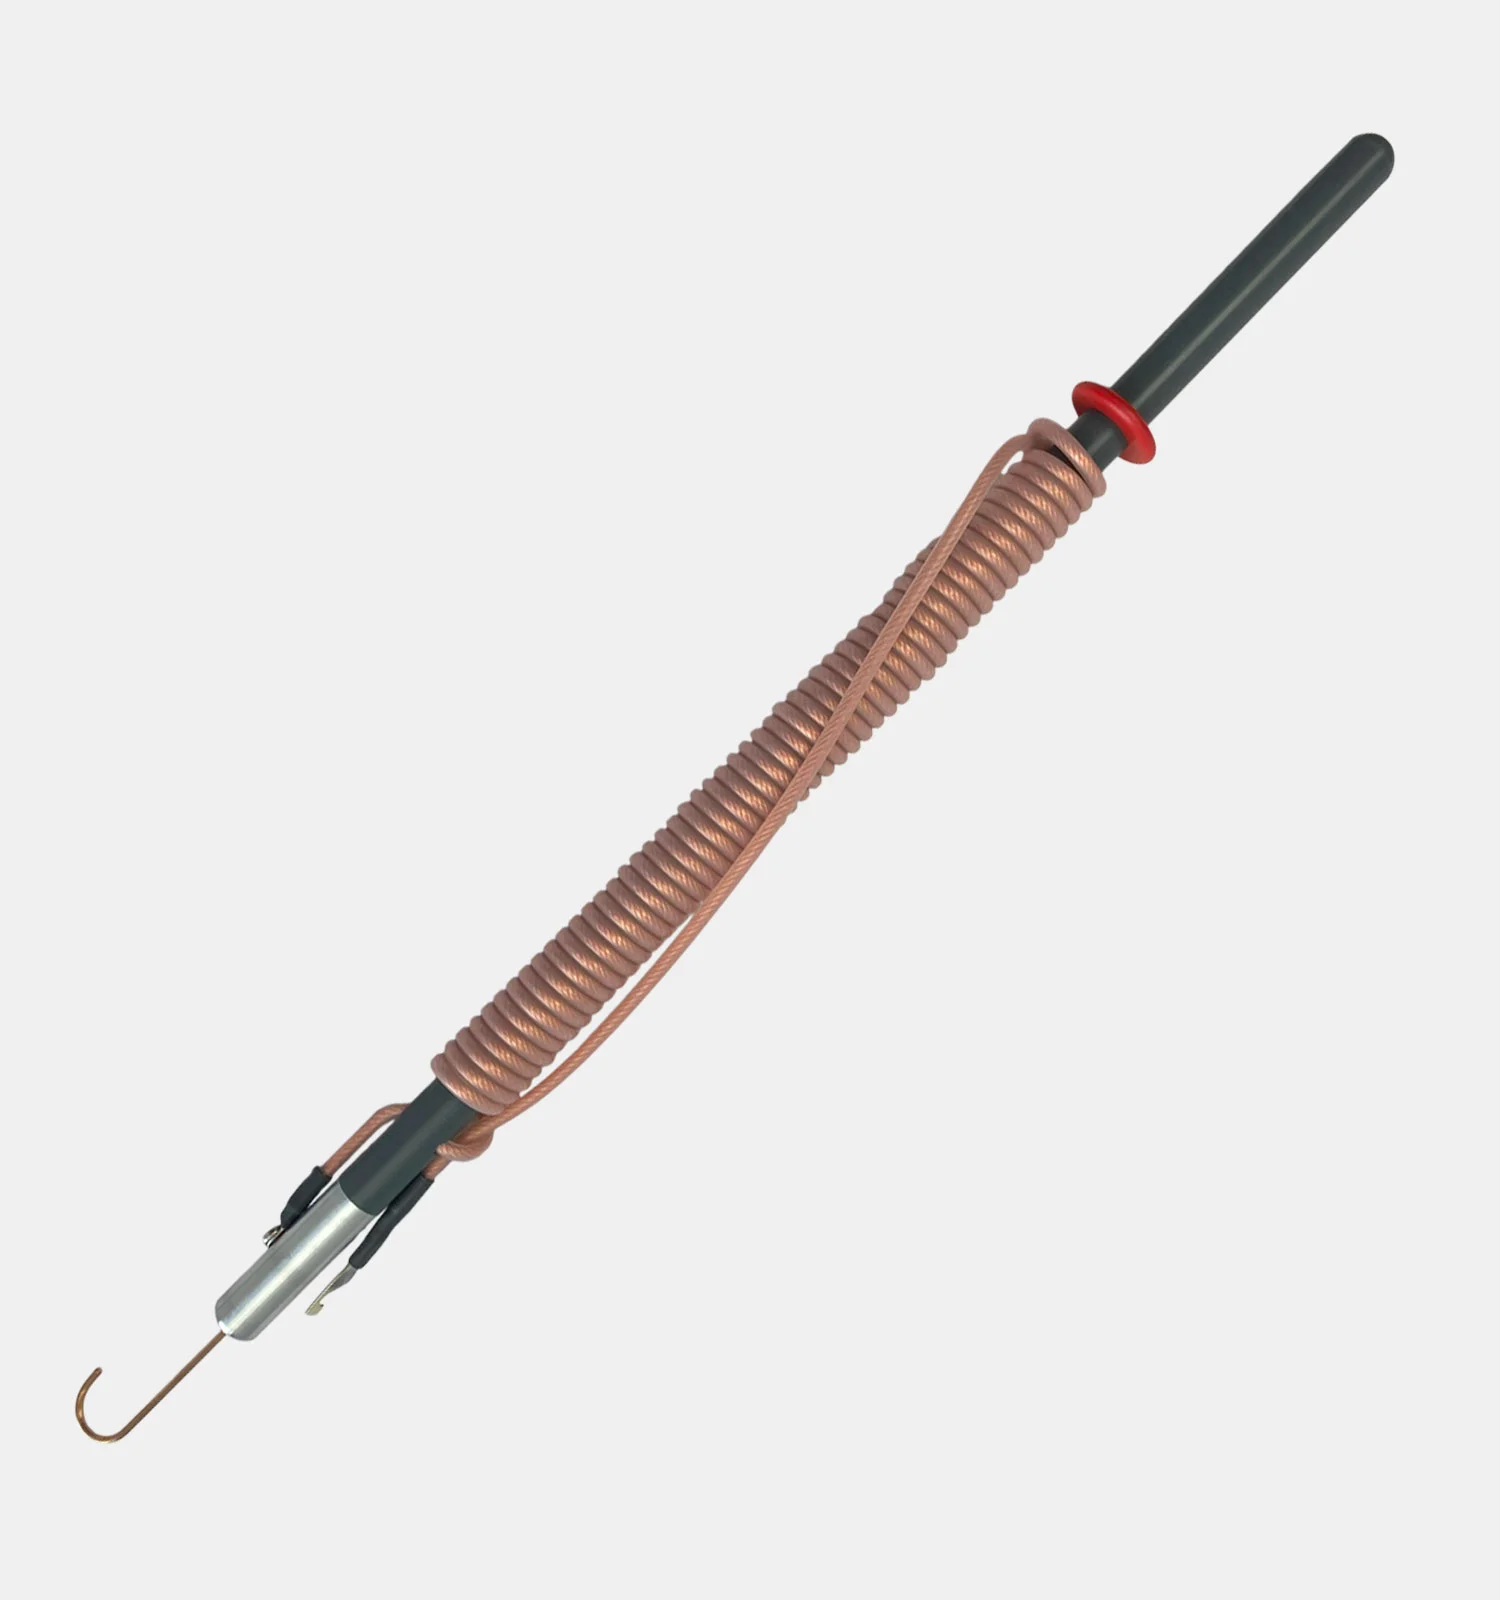 Suppliers of ES30 Earthing Stick UK